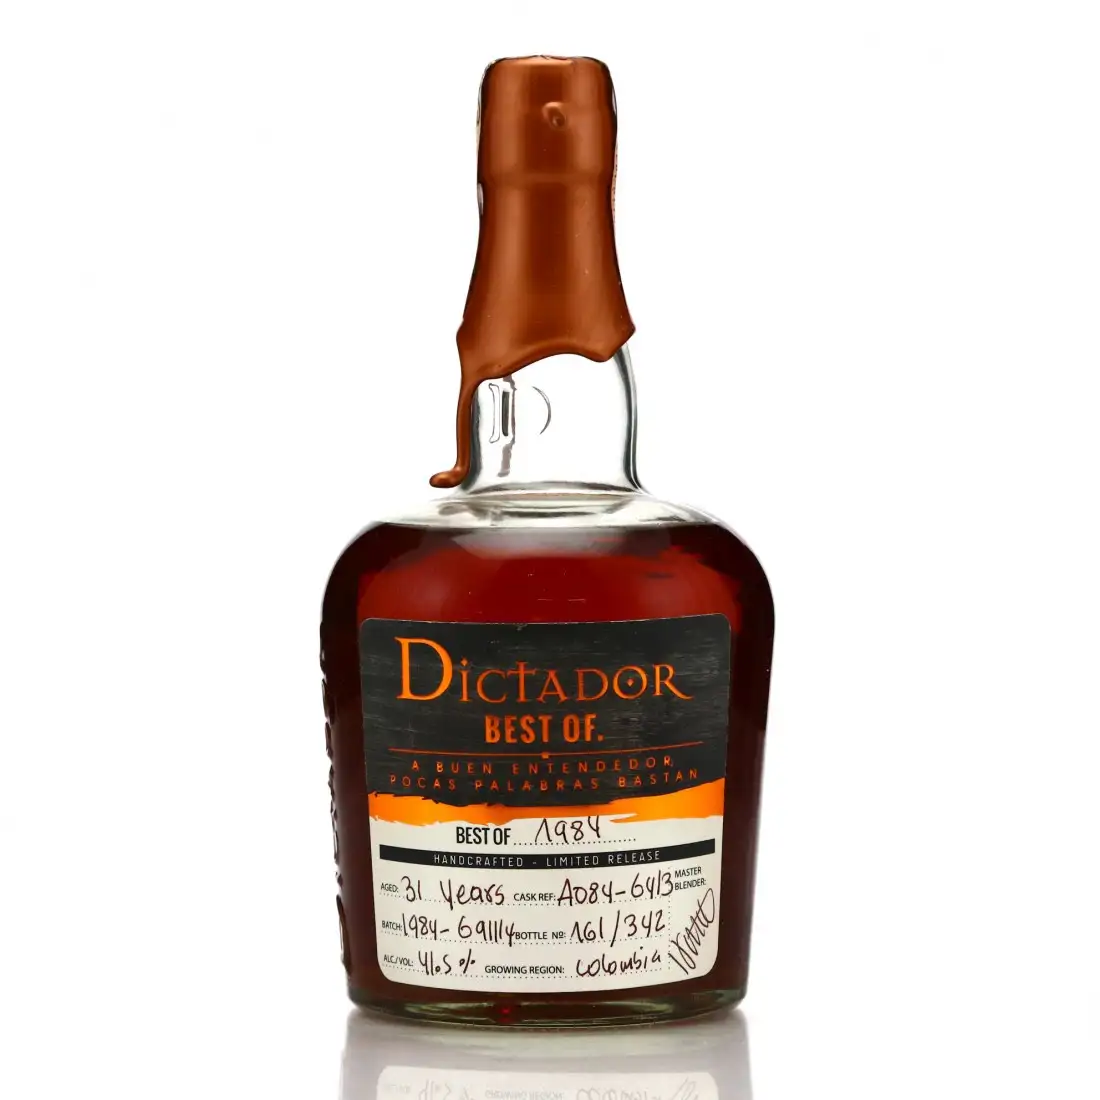 Image of the front of the bottle of the rum Dictador Best of